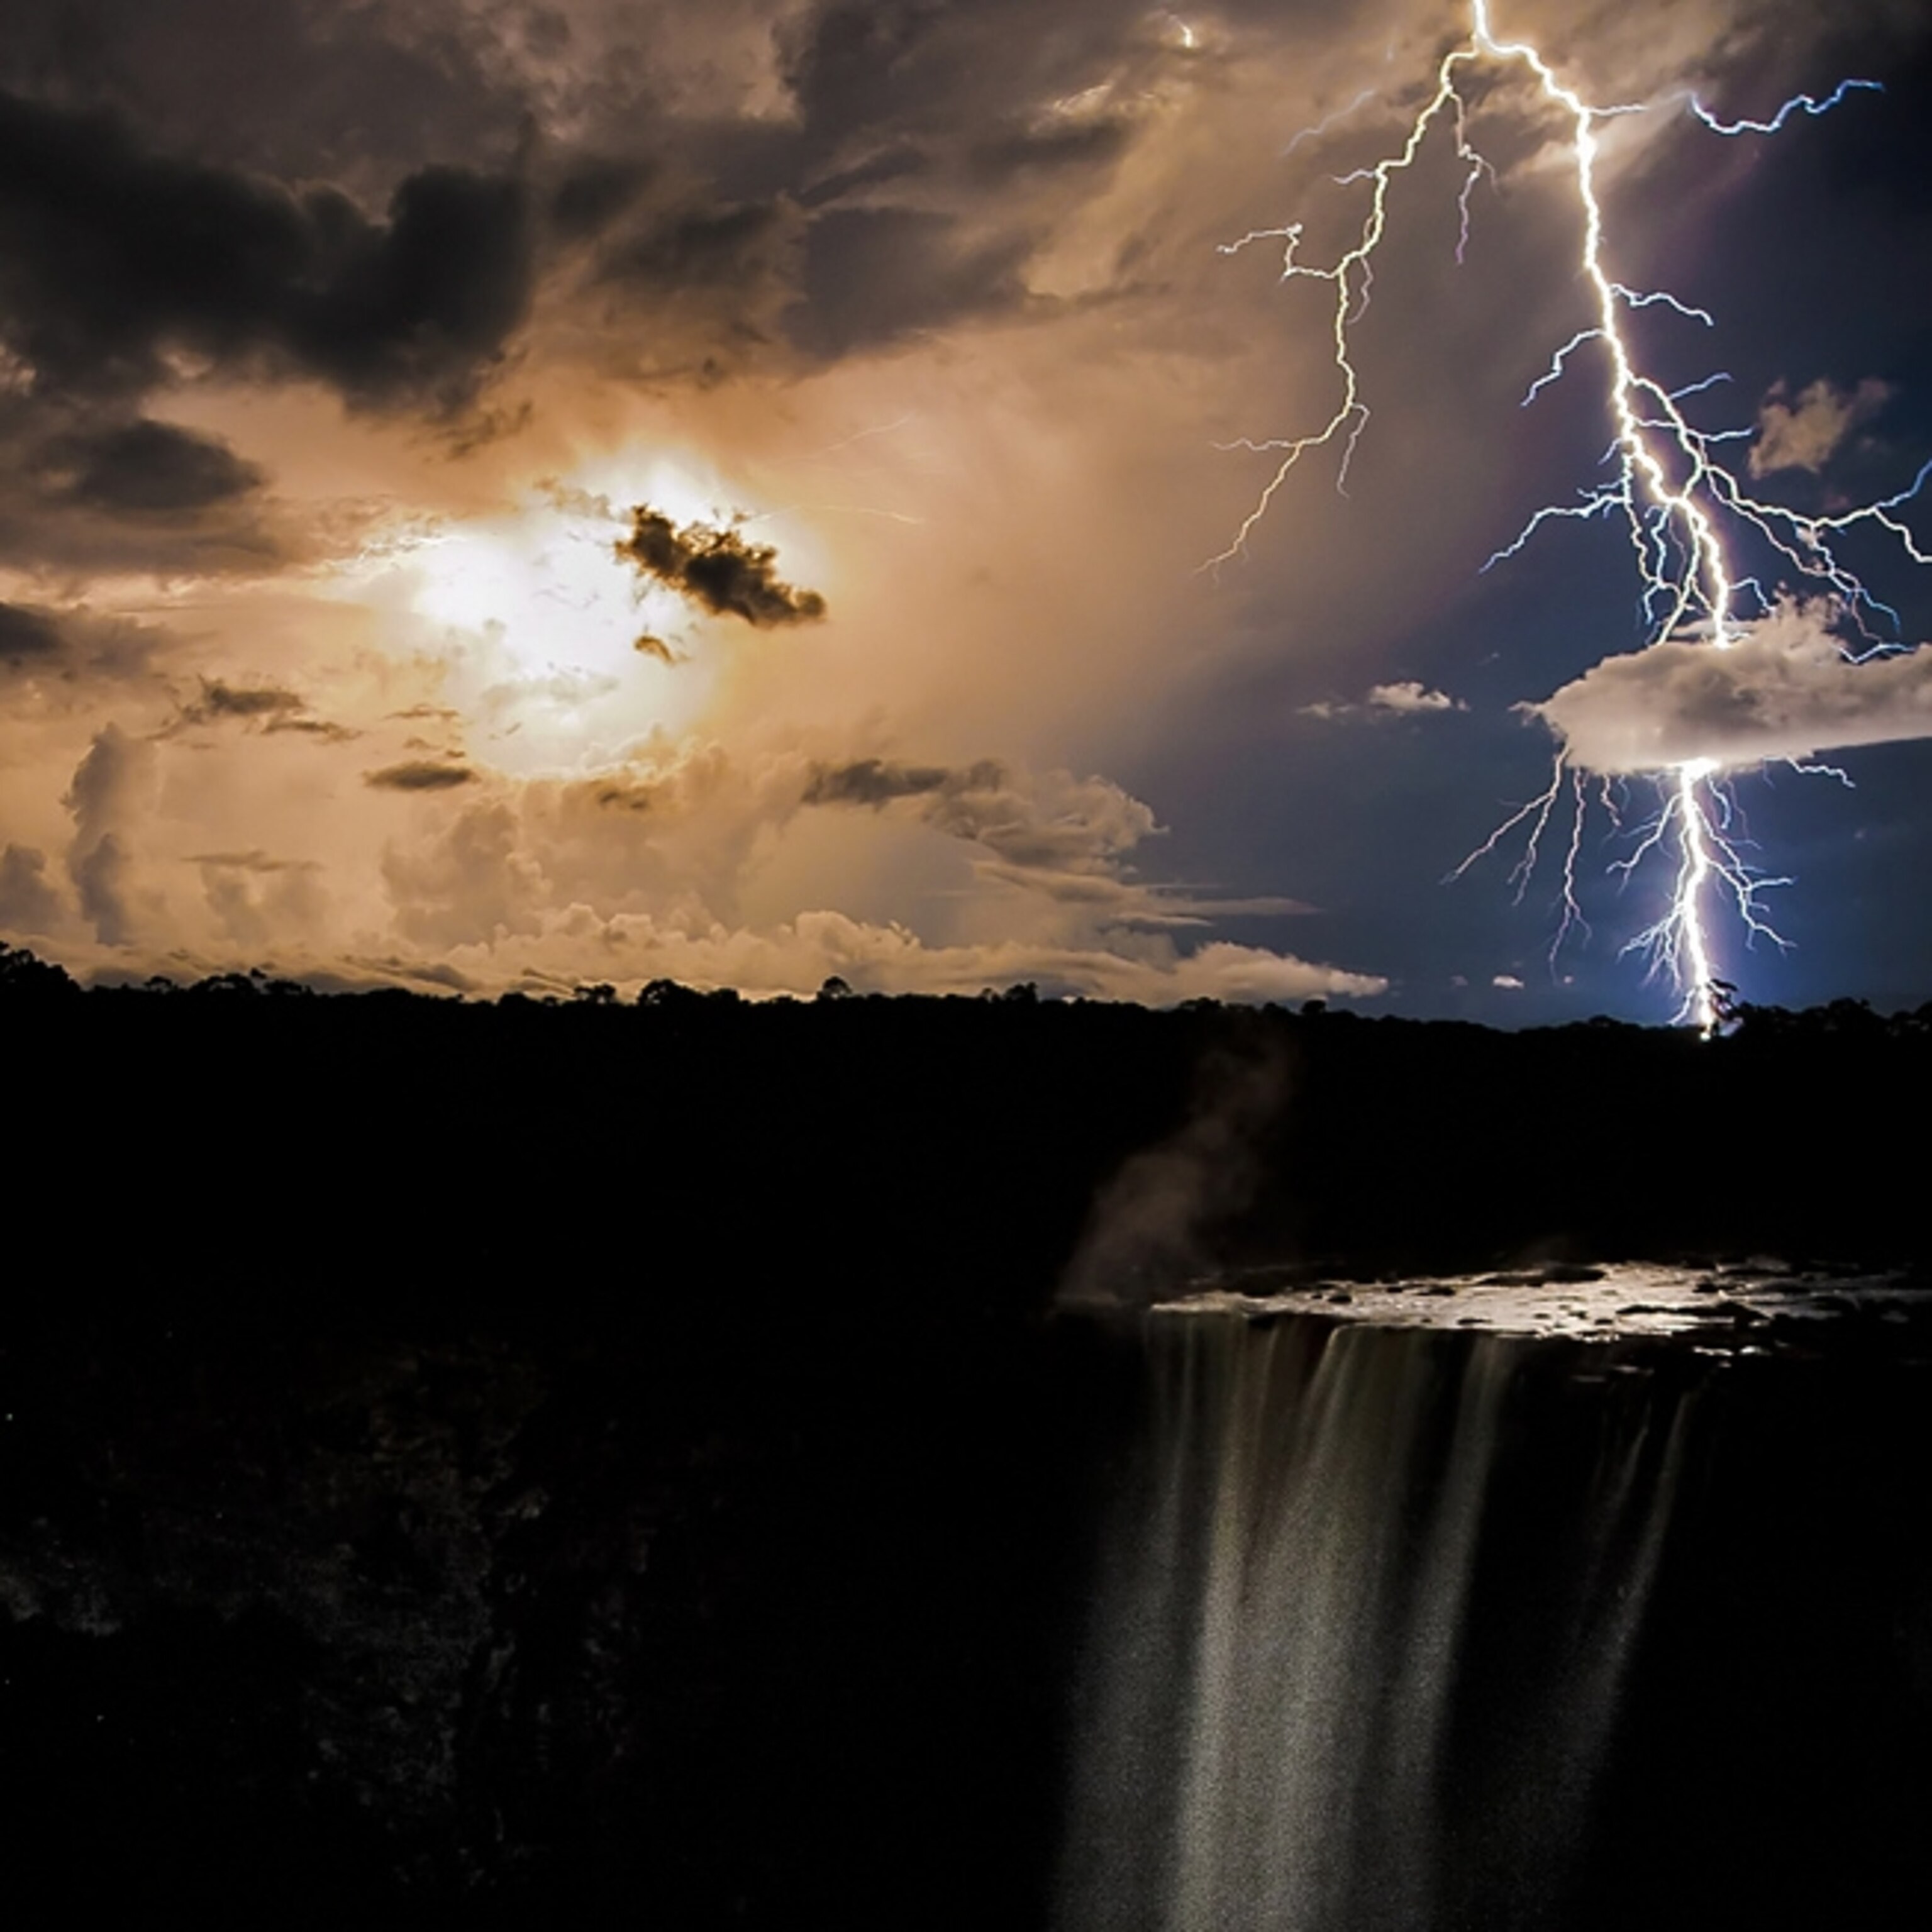 Waterfall And Lightning Wallpapers